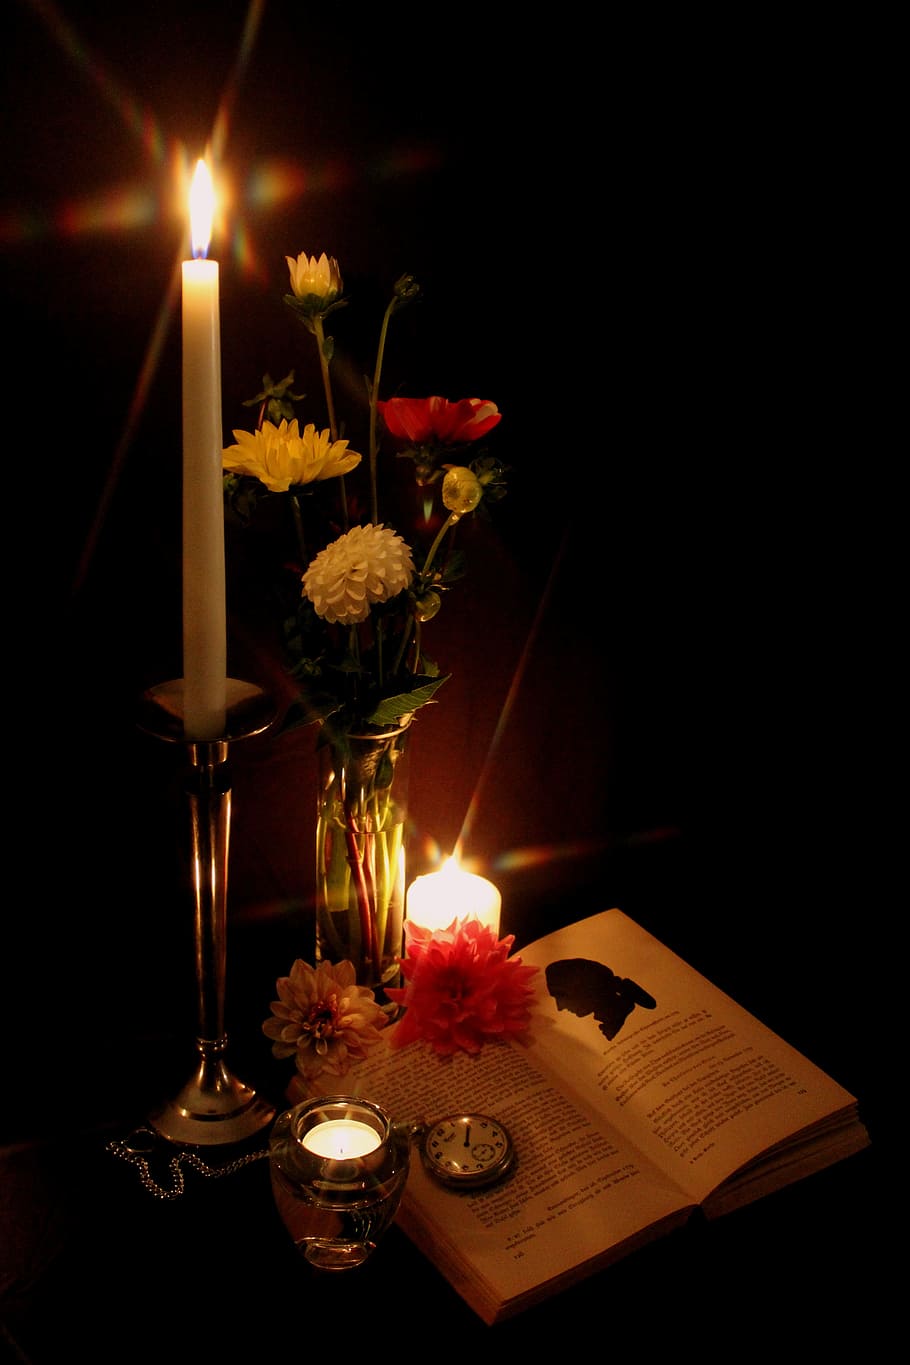 candlelight, goethe, book, read, mood, literature, book pages, pitched, old, education